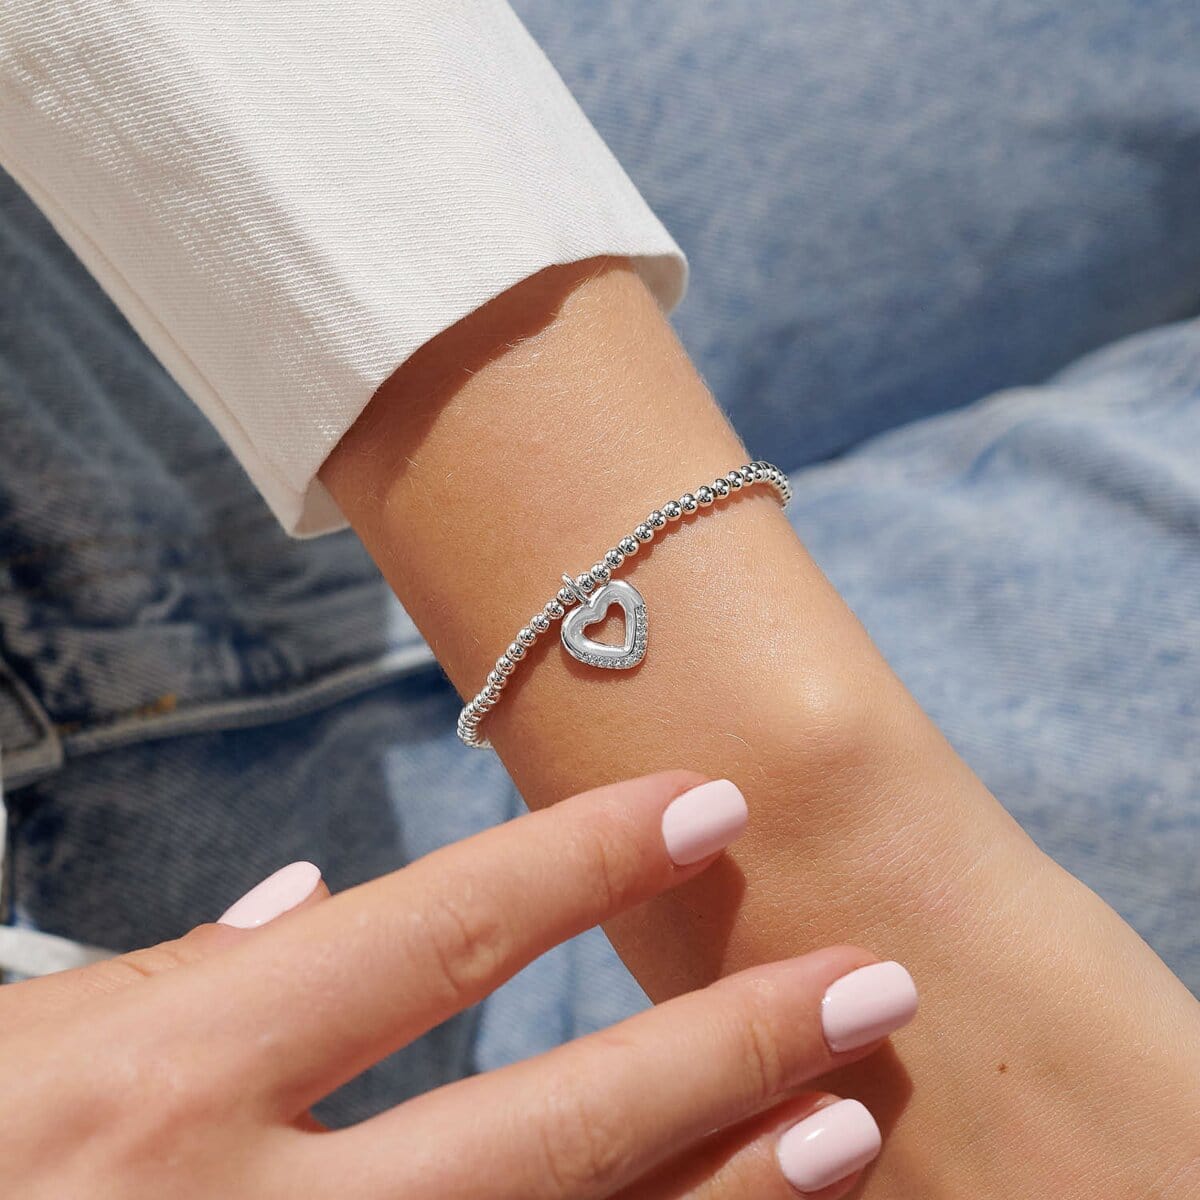 Joma Jewellery Bracelet Joma Jewellery Bracelet - A Little Happy First Mother's Day (Heart)